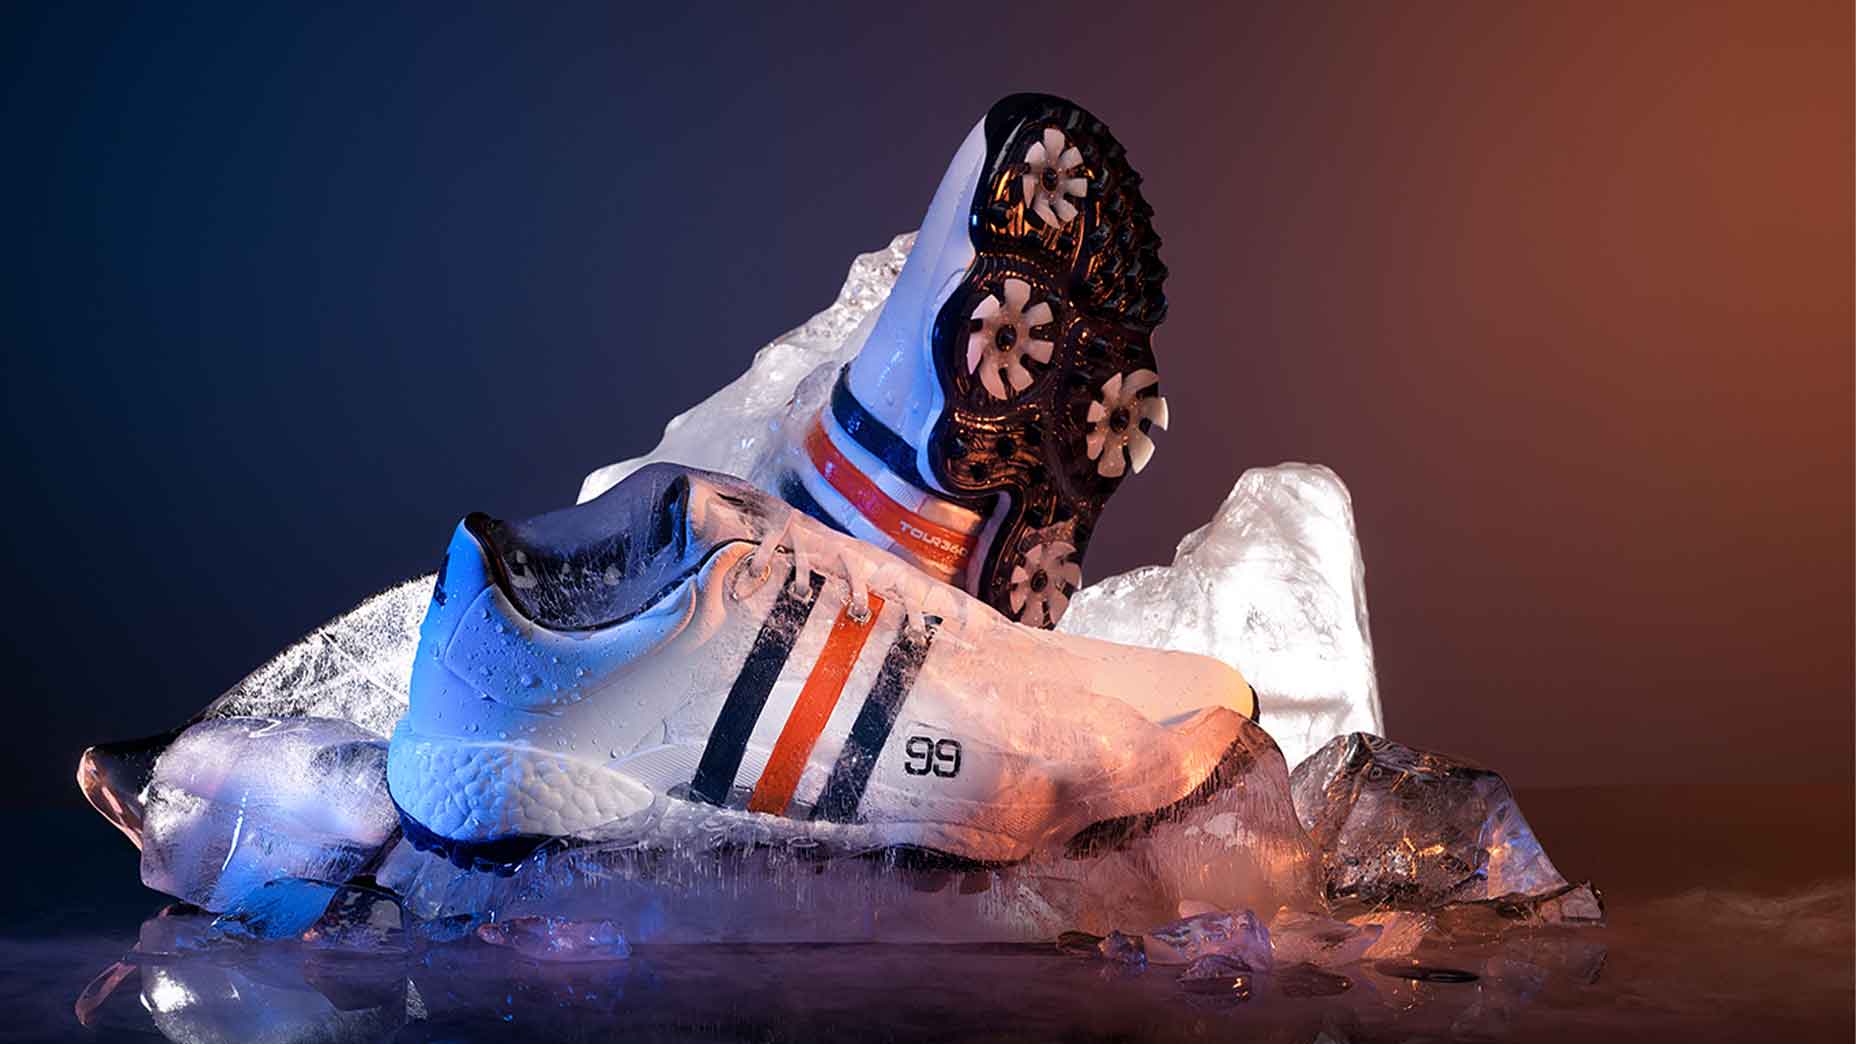 drops limited-edition Gretzky-inspired golf shoes